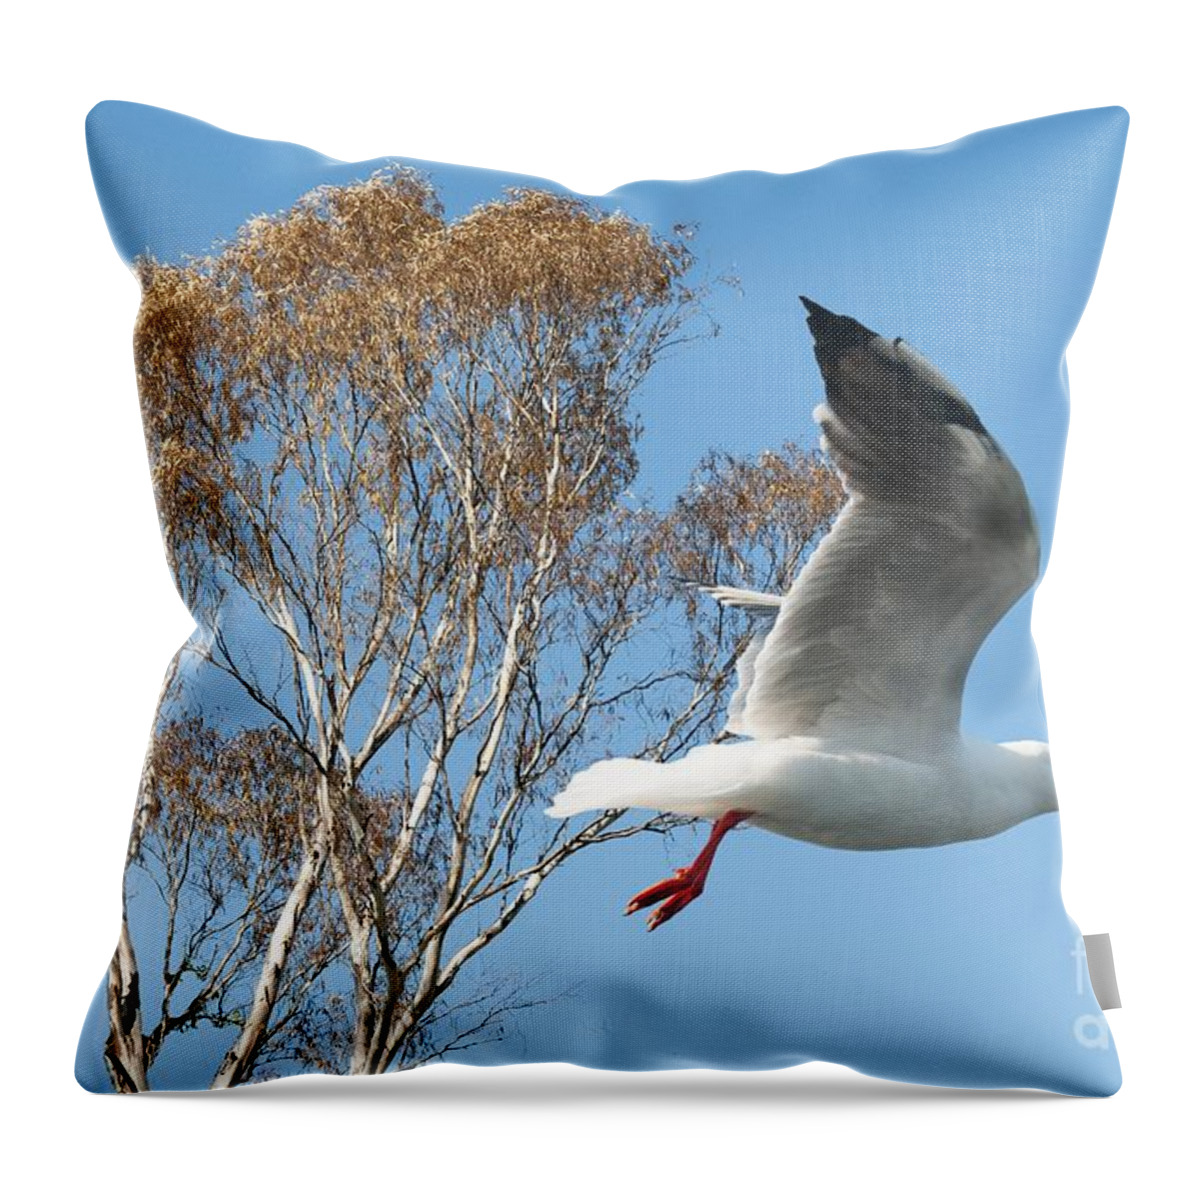 Seagull Throw Pillow featuring the photograph Beautiful Australian Seagull. Exclusive Photo Art. by Geoff Childs